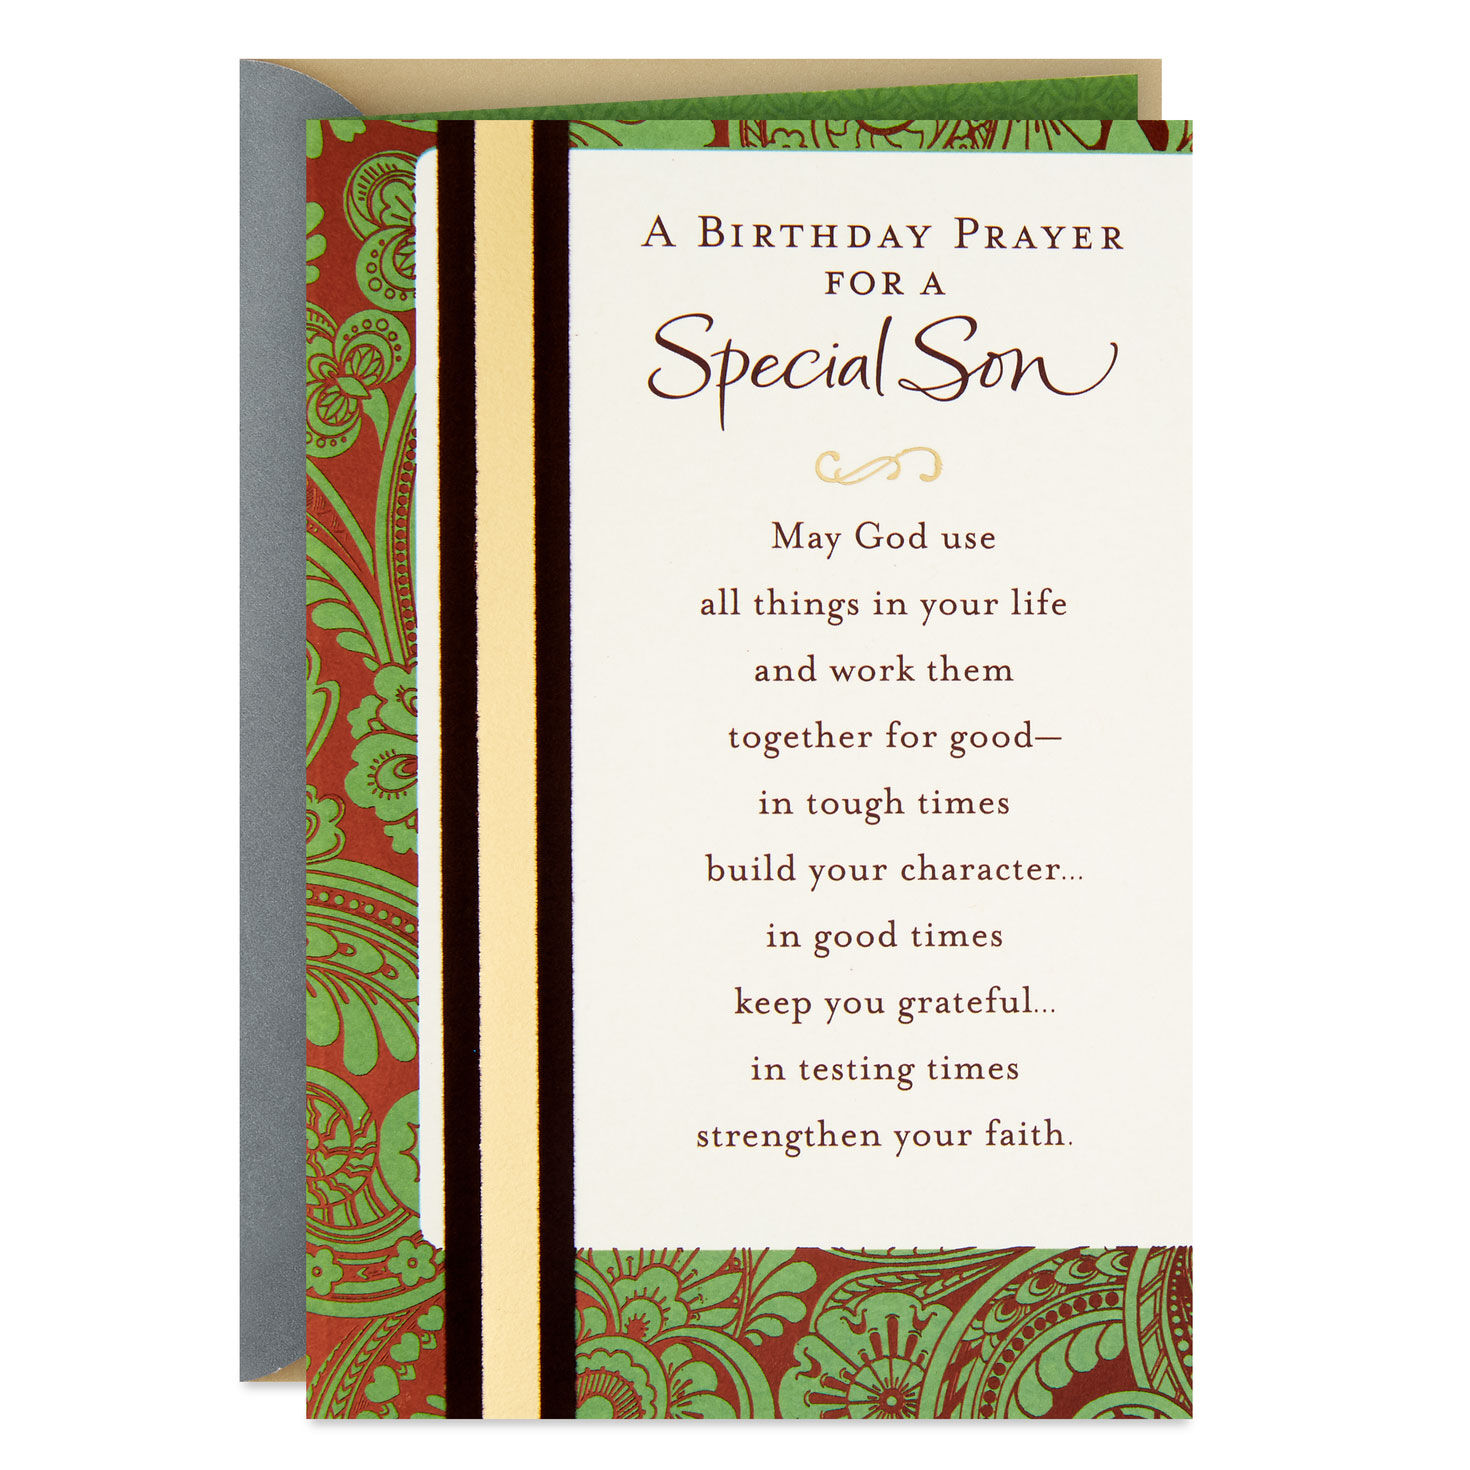 Every Blessing and Joy Religious Birthday Card for Son for only USD 5.59 | Hallmark